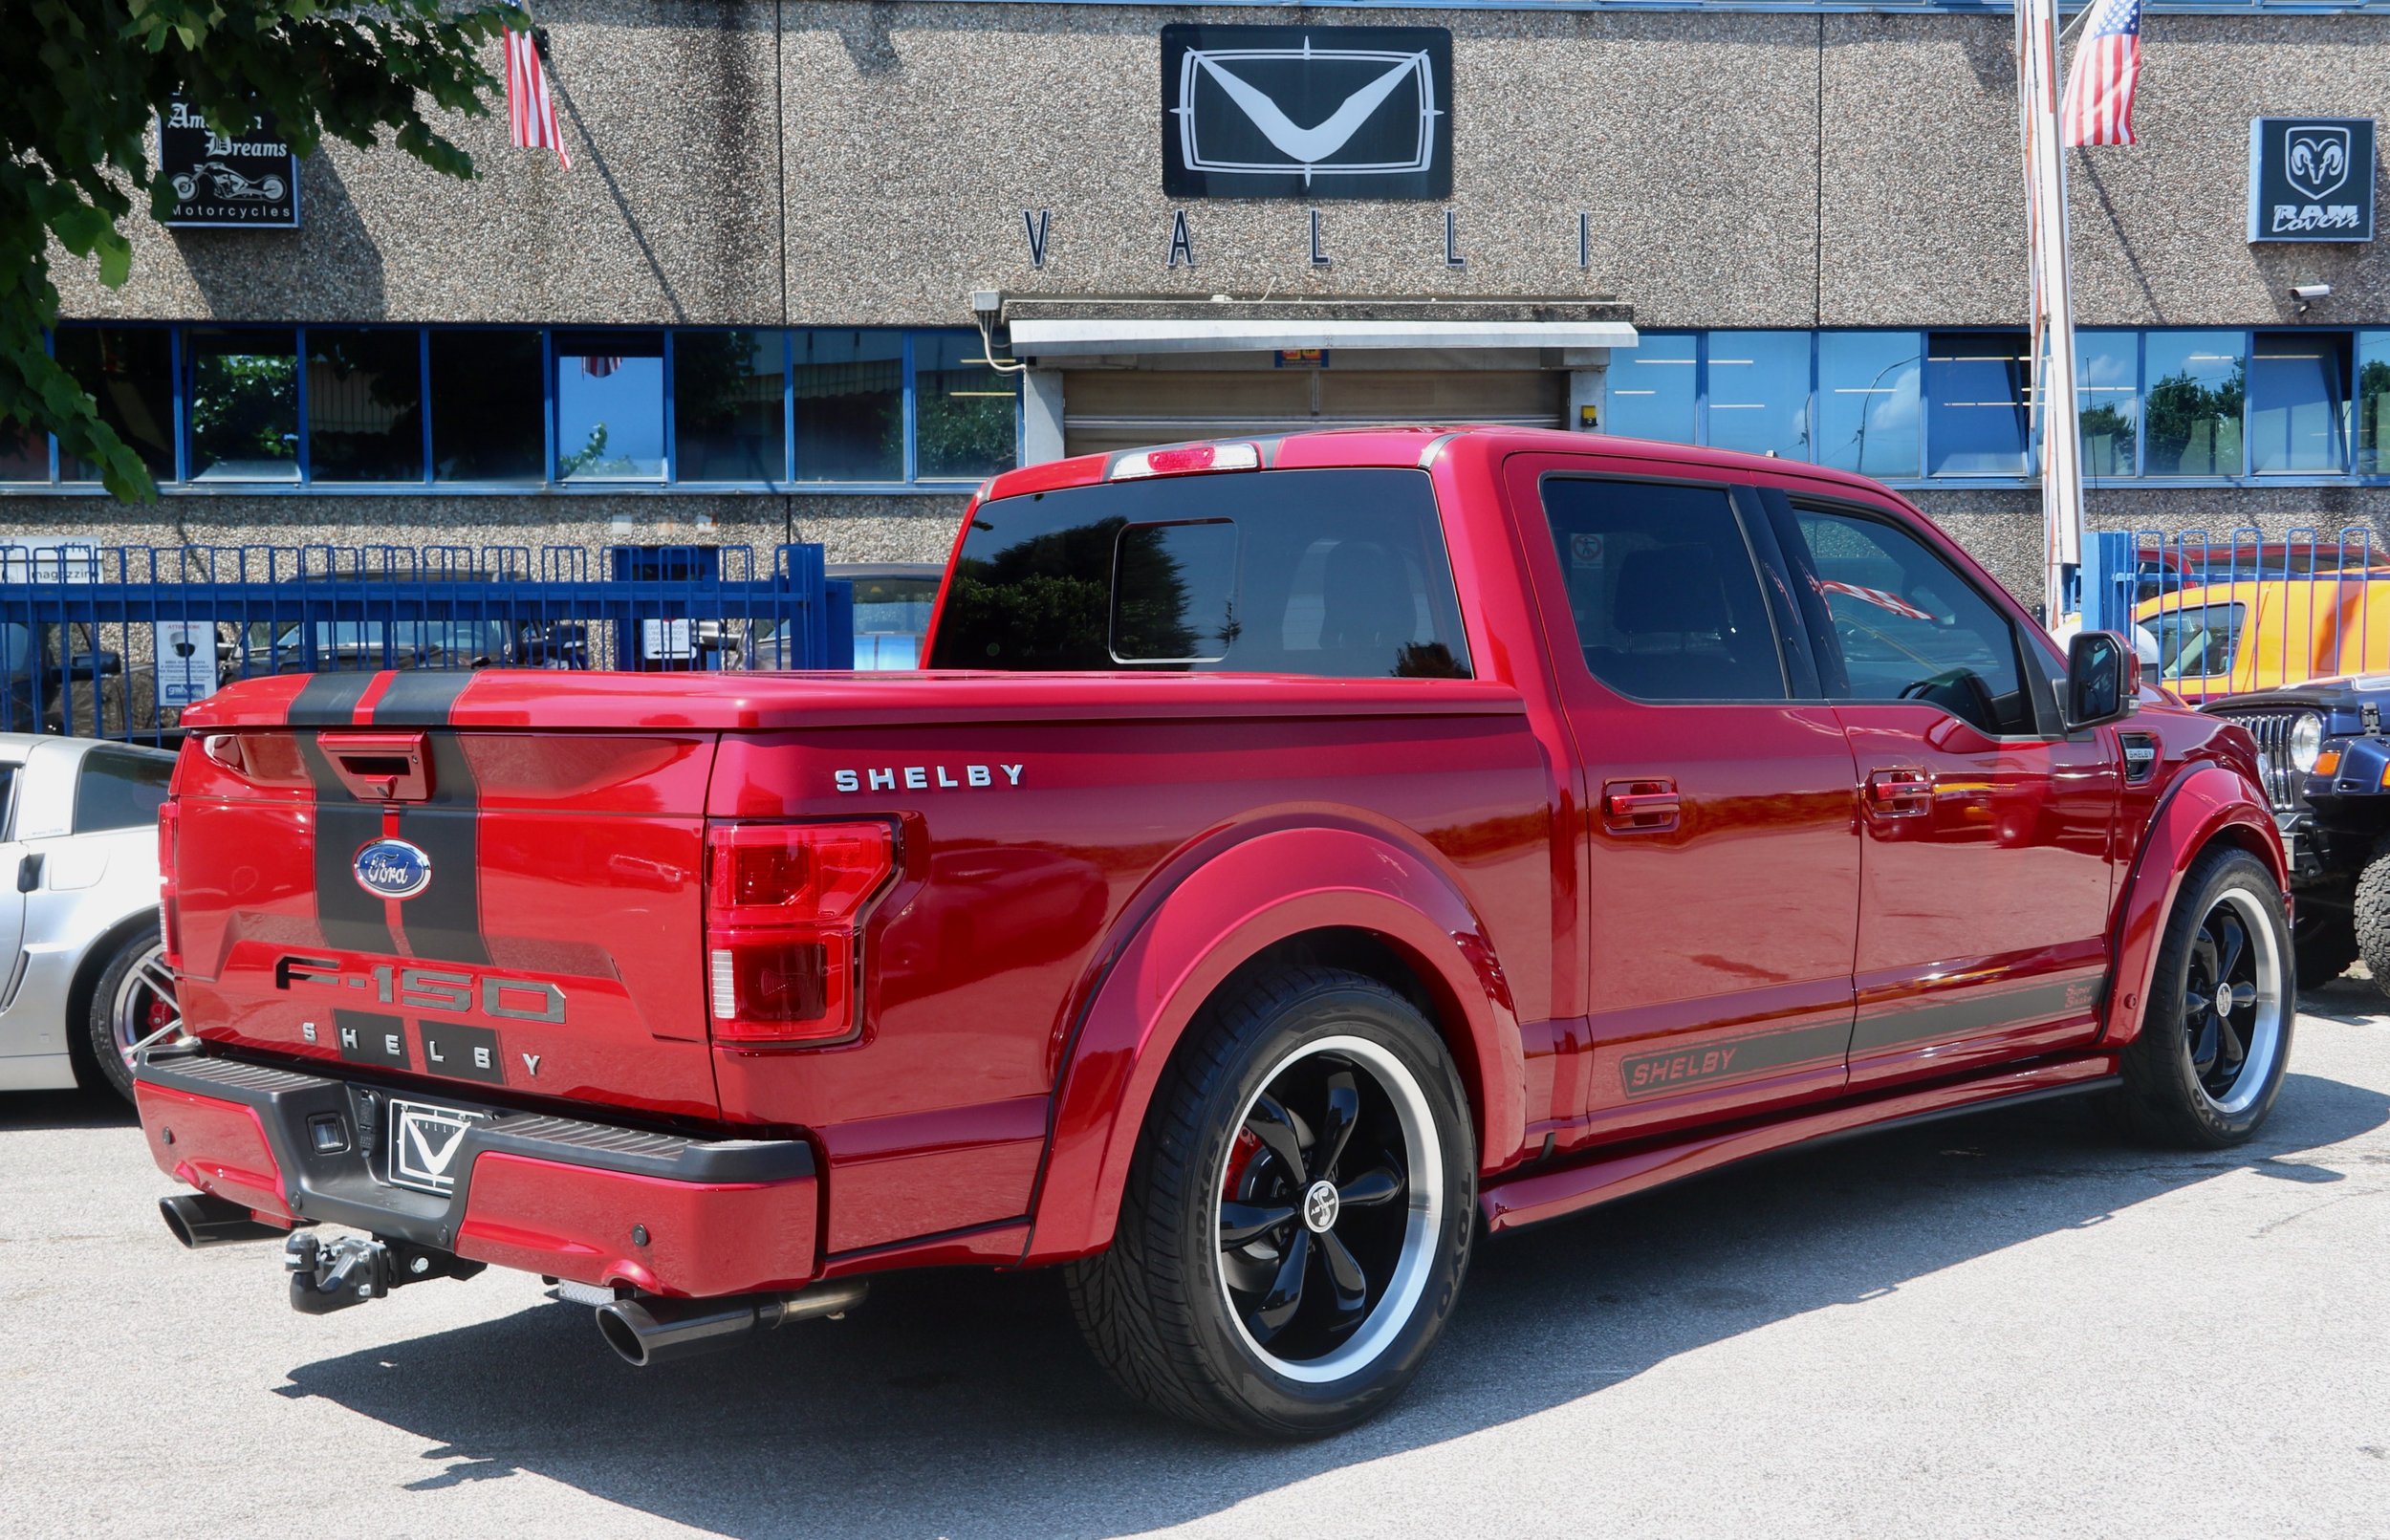 09 2020 Ford F150 Shelby Super Snake C.S.M. 20STS0259 Rapid Red VALLIstore Wide-Body.jpeg